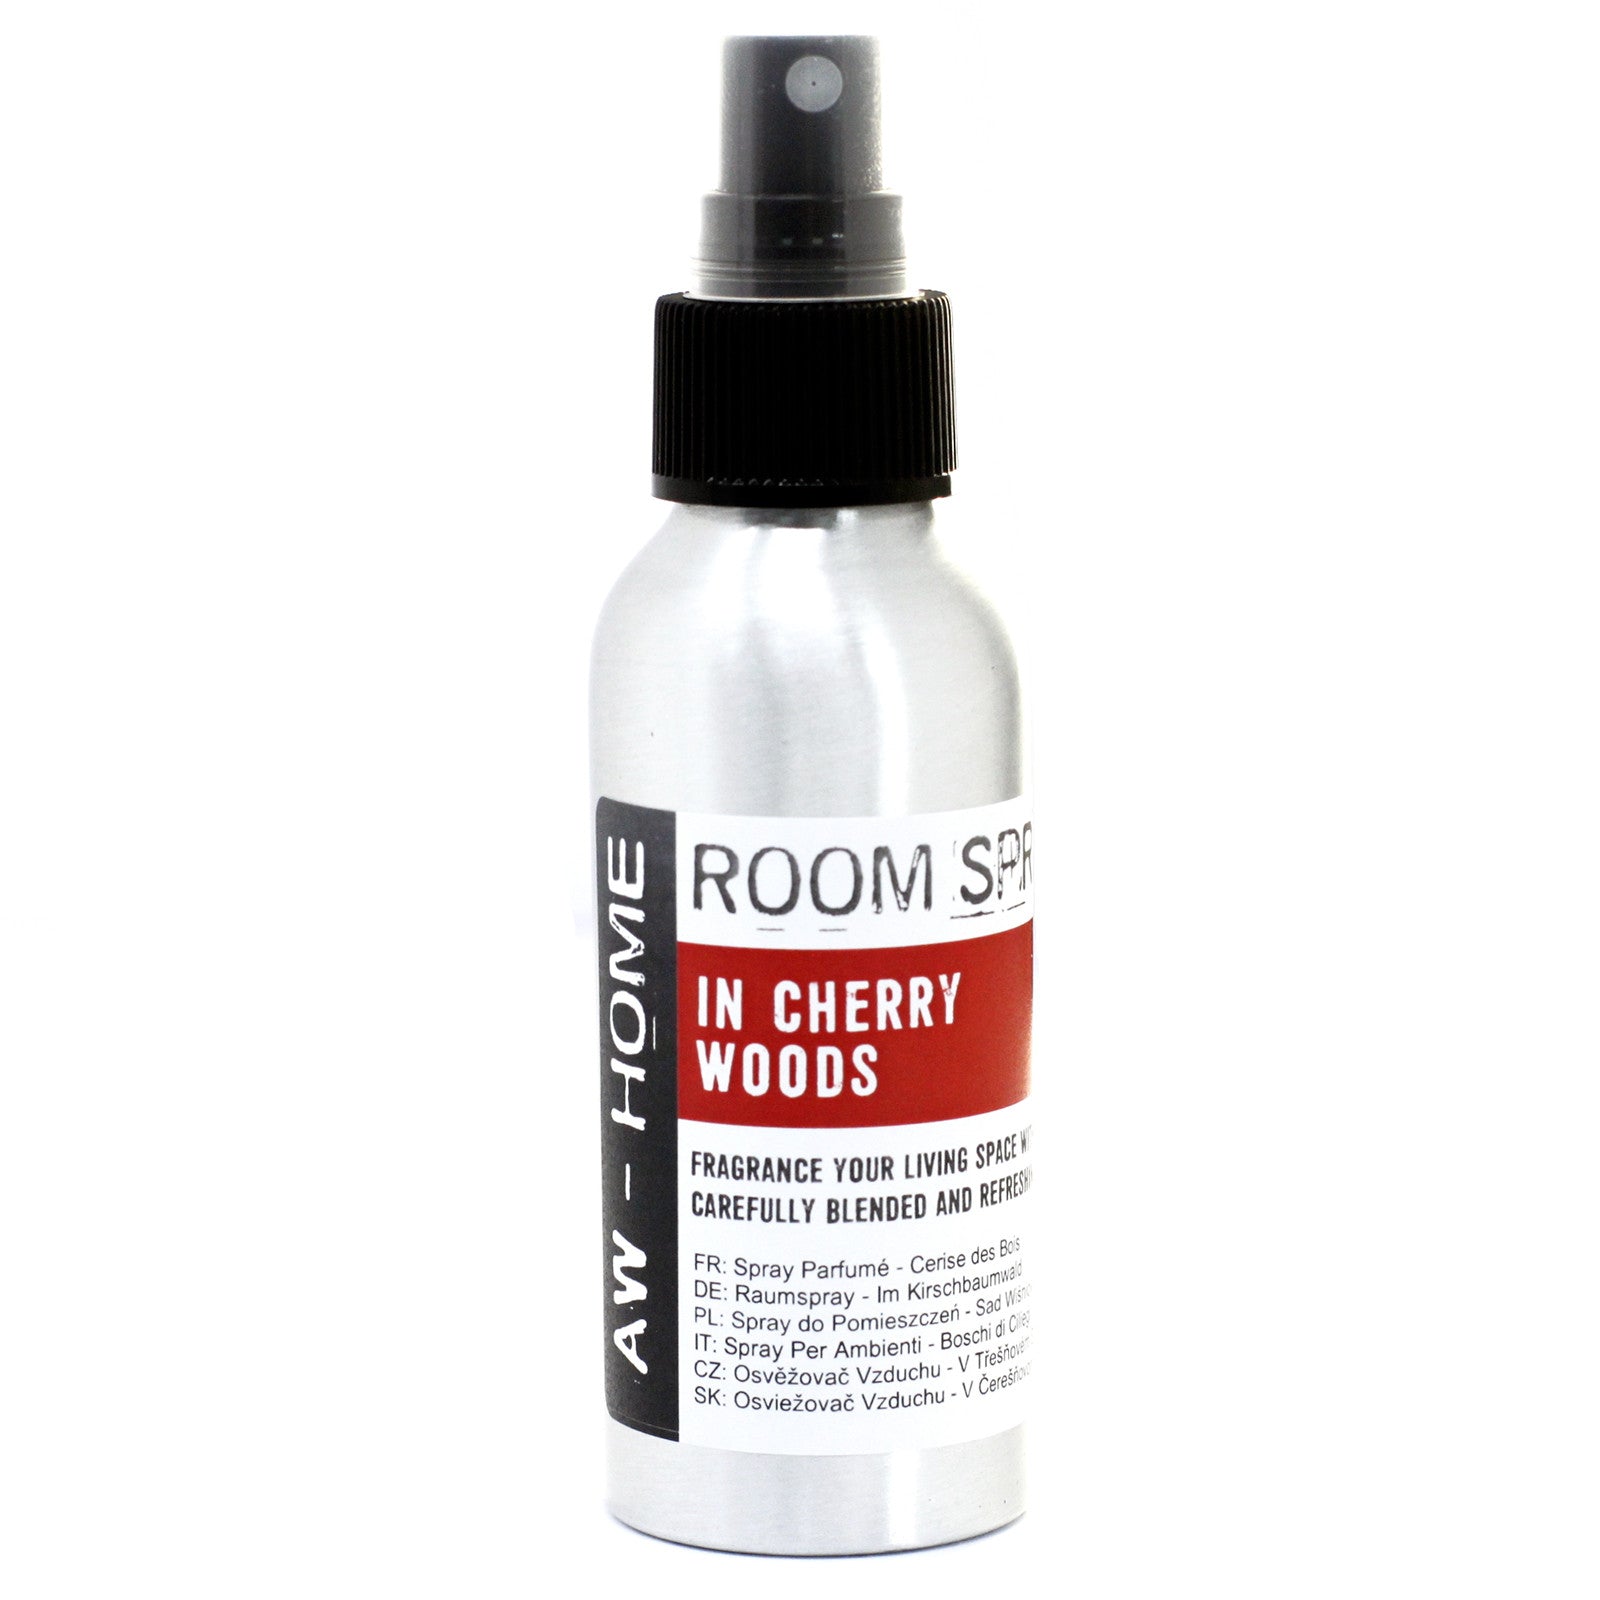 View 100ml Room Spray In Cherry Woods information